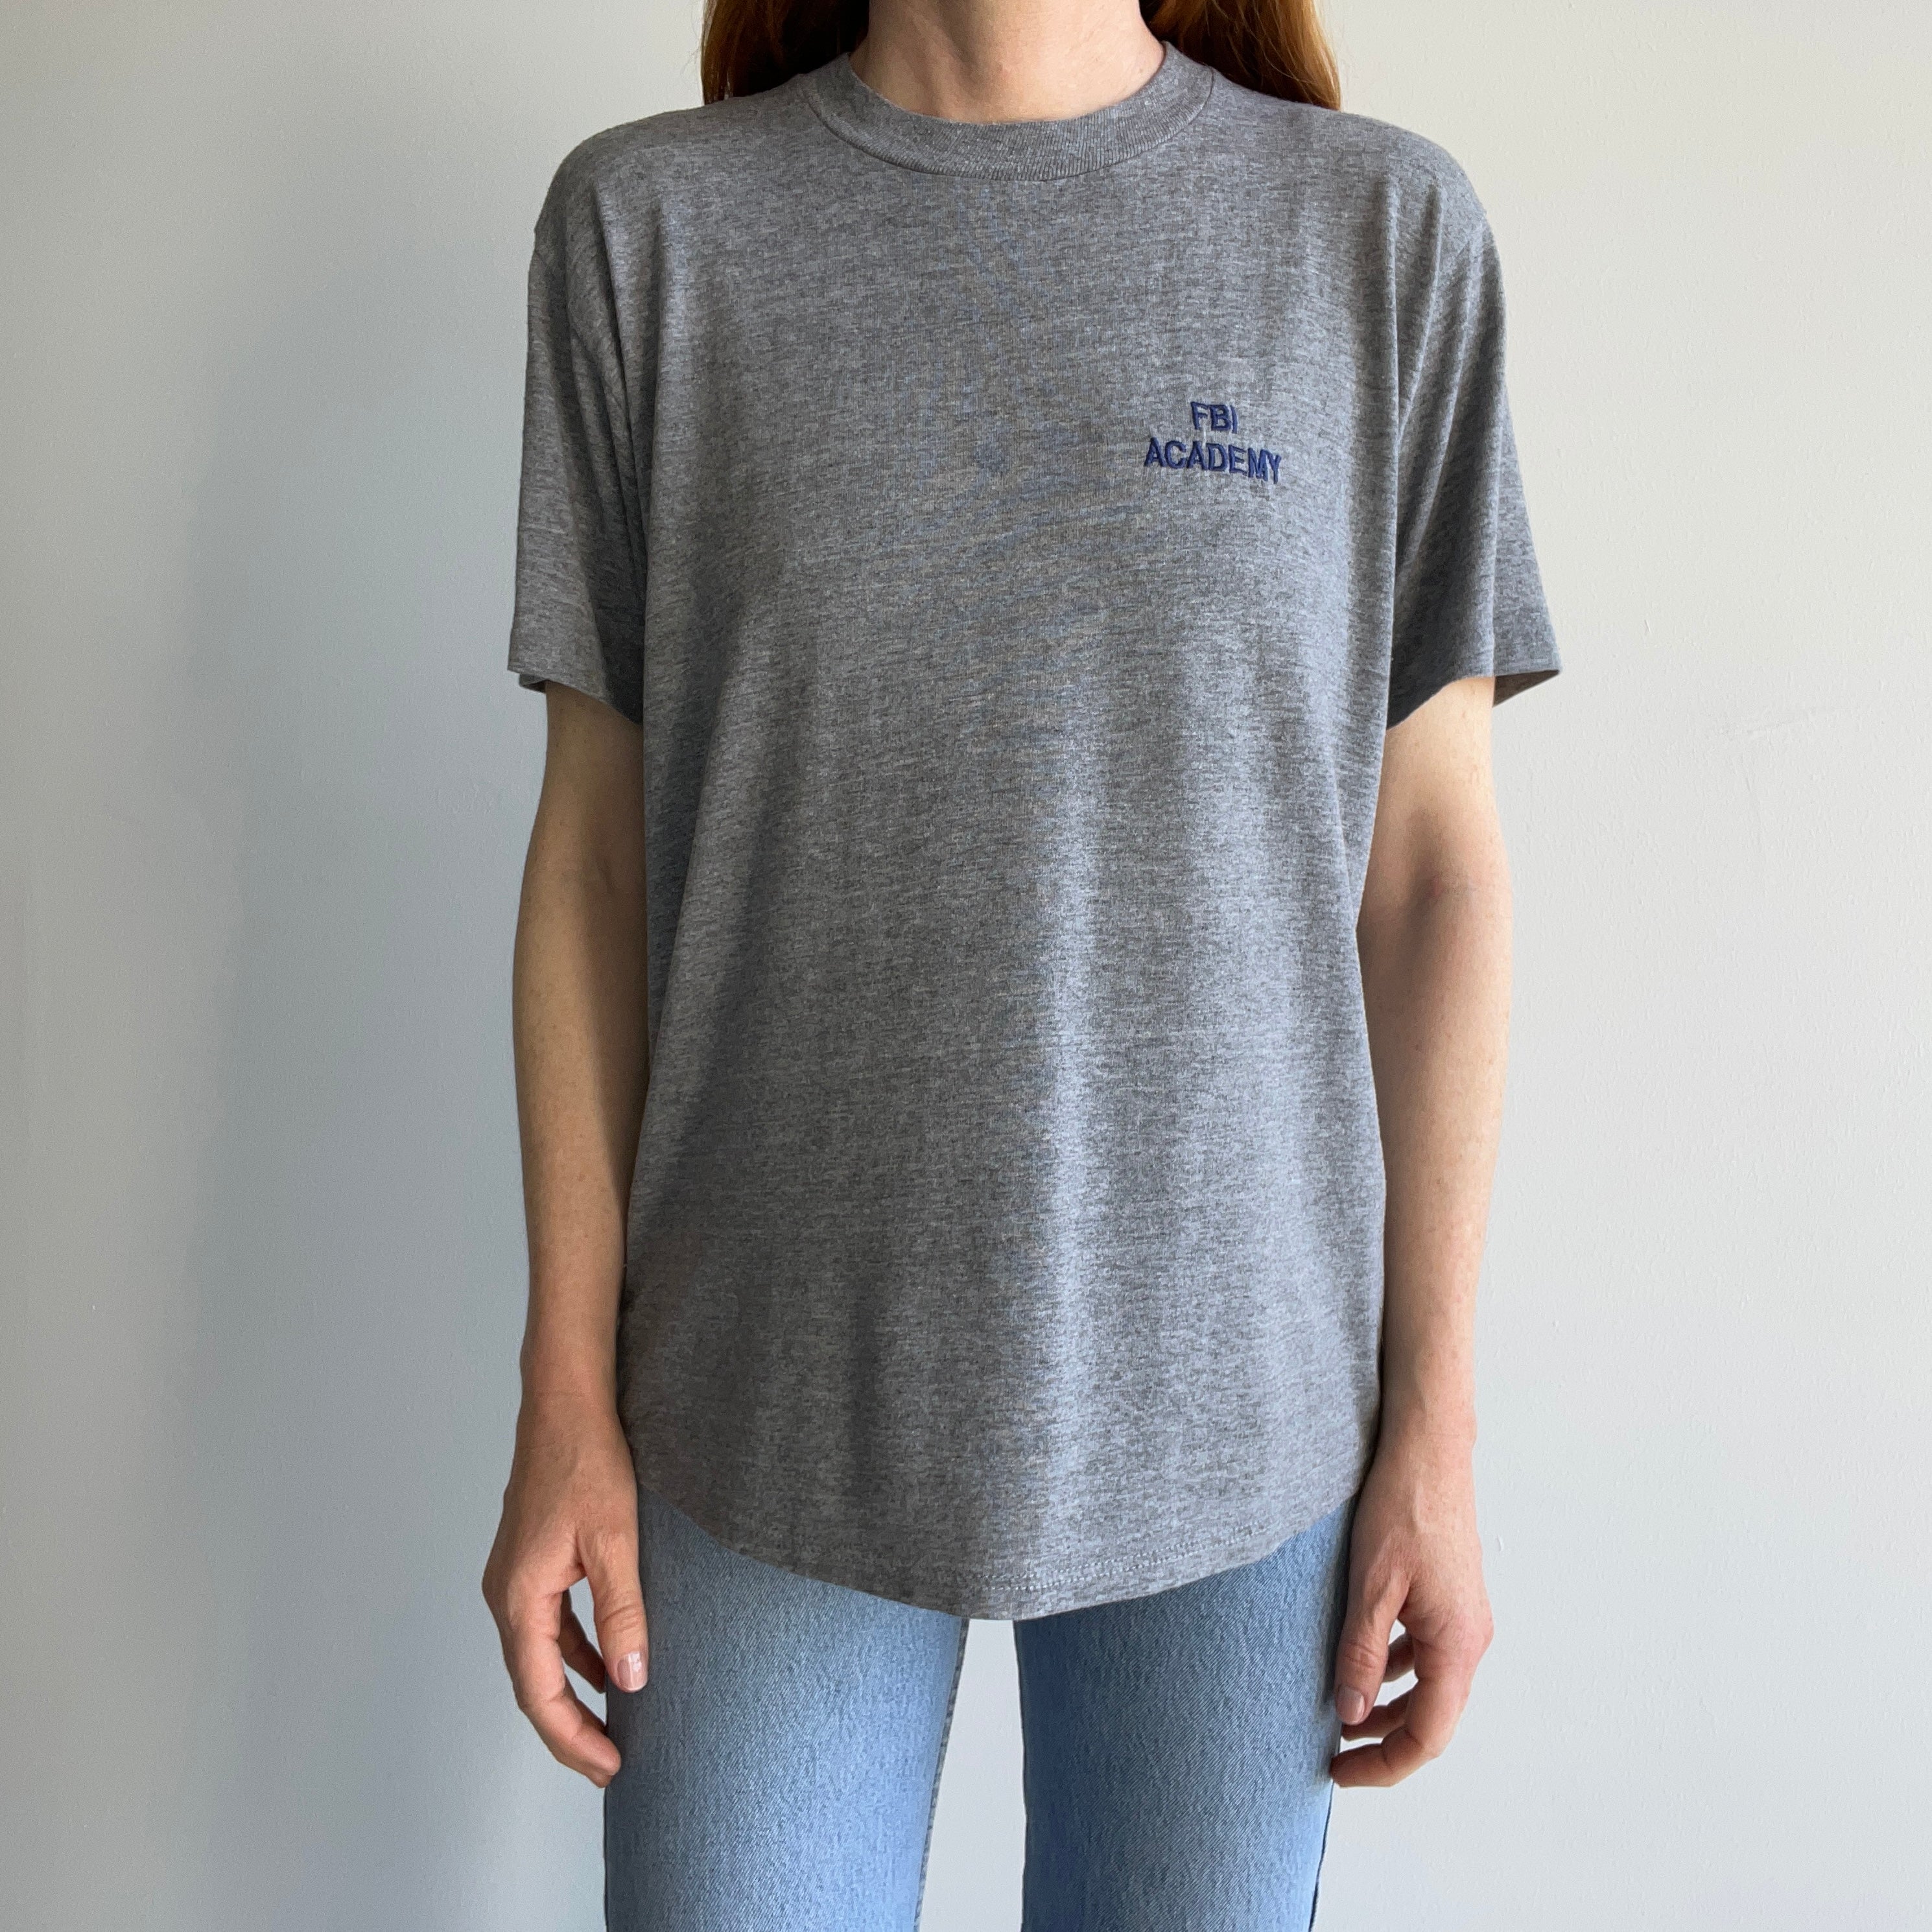 1980s FBI Super Slouchy and Thin T-Shirt by Soffe